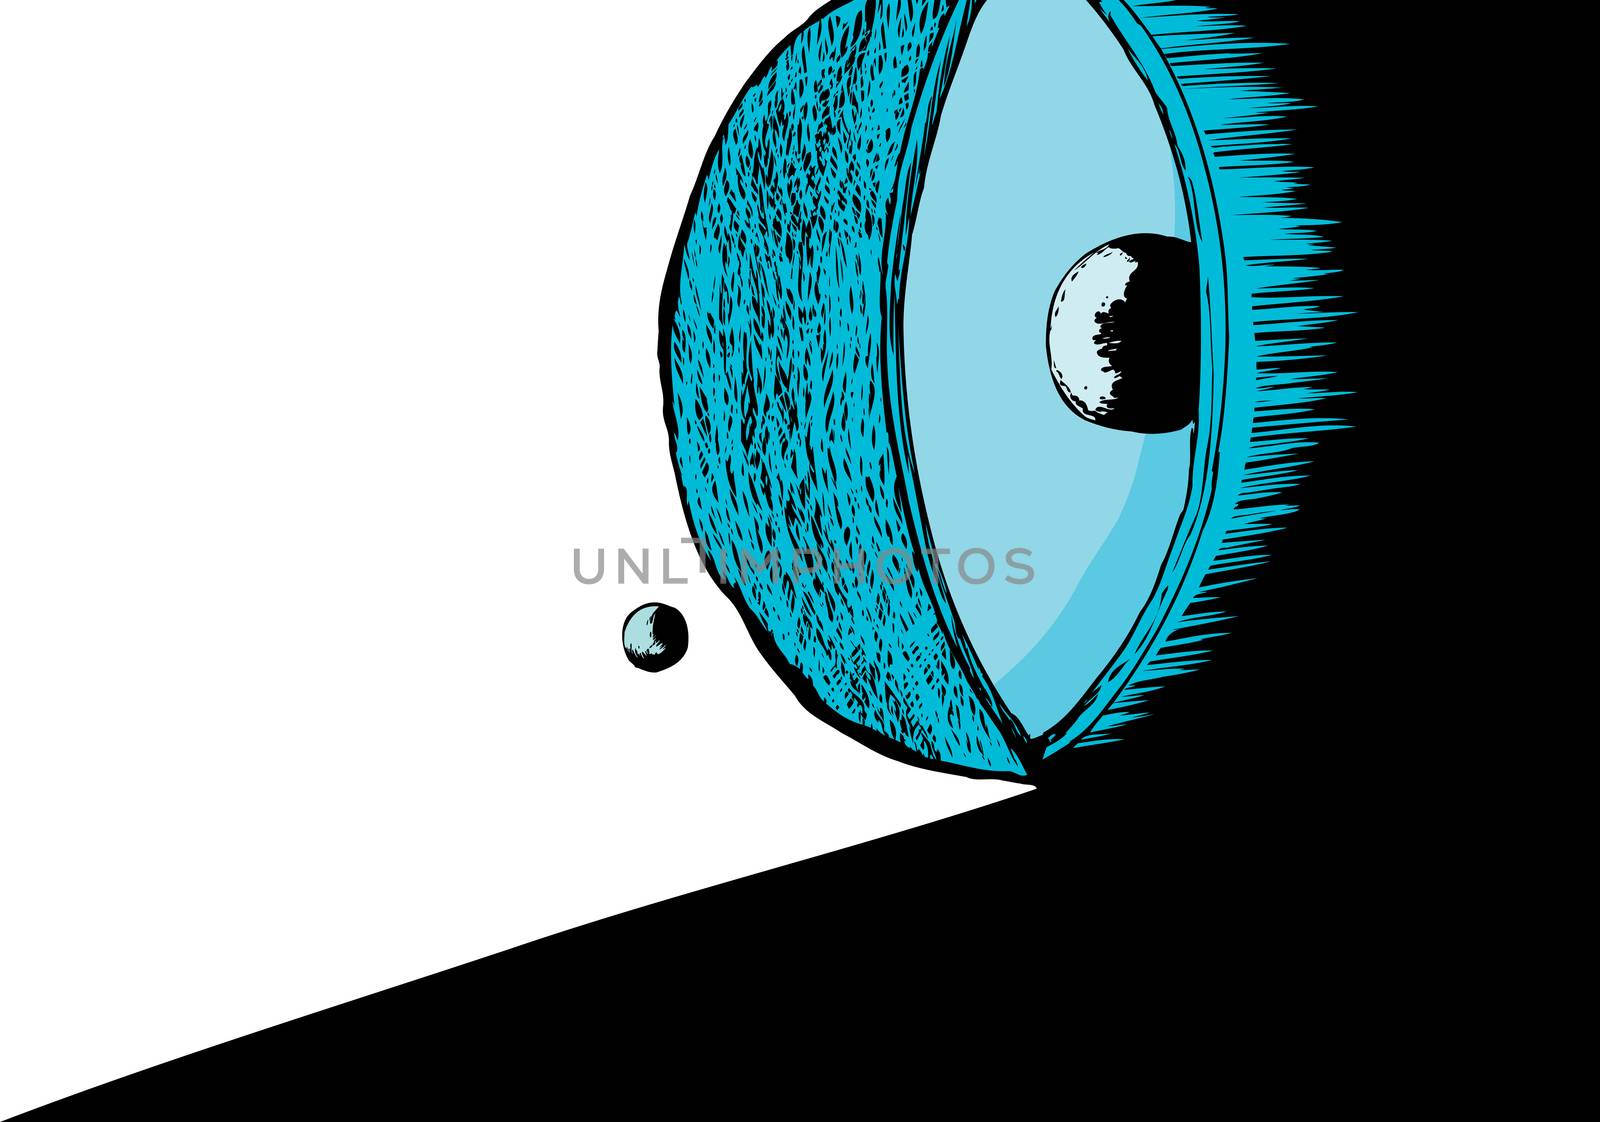 Cross section of glowing blue atom with shadow over white background